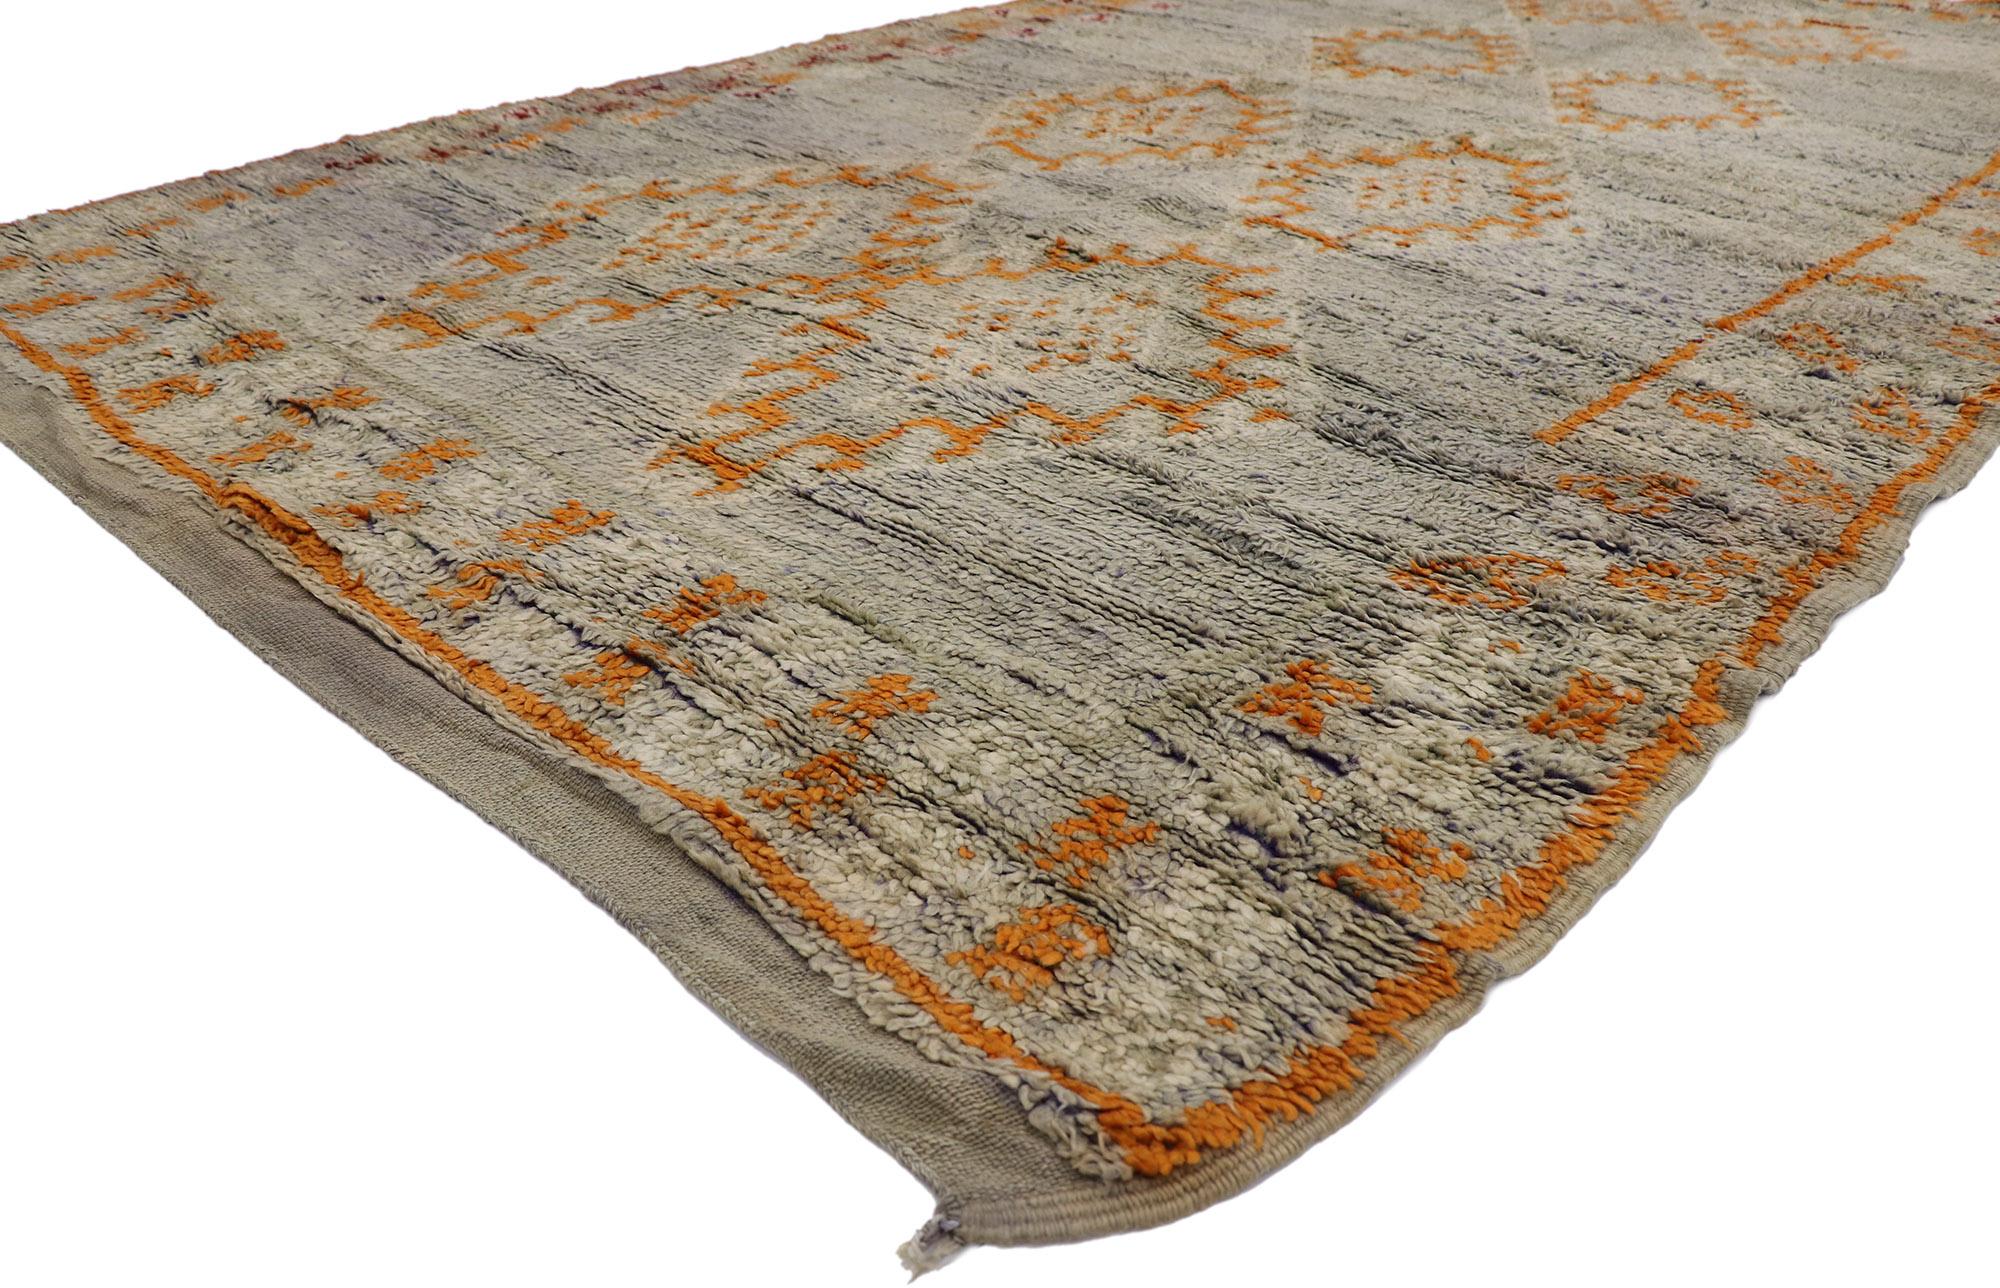 21433 Vintage Berber Moroccan Rug 06'03 x 11'02. Showcasing an expressive design, incredible detail and texture, this hand knotted wool vintage Berber Moroccan rug is a captivating vision of woven beauty. The abrashed gray and lavender striated